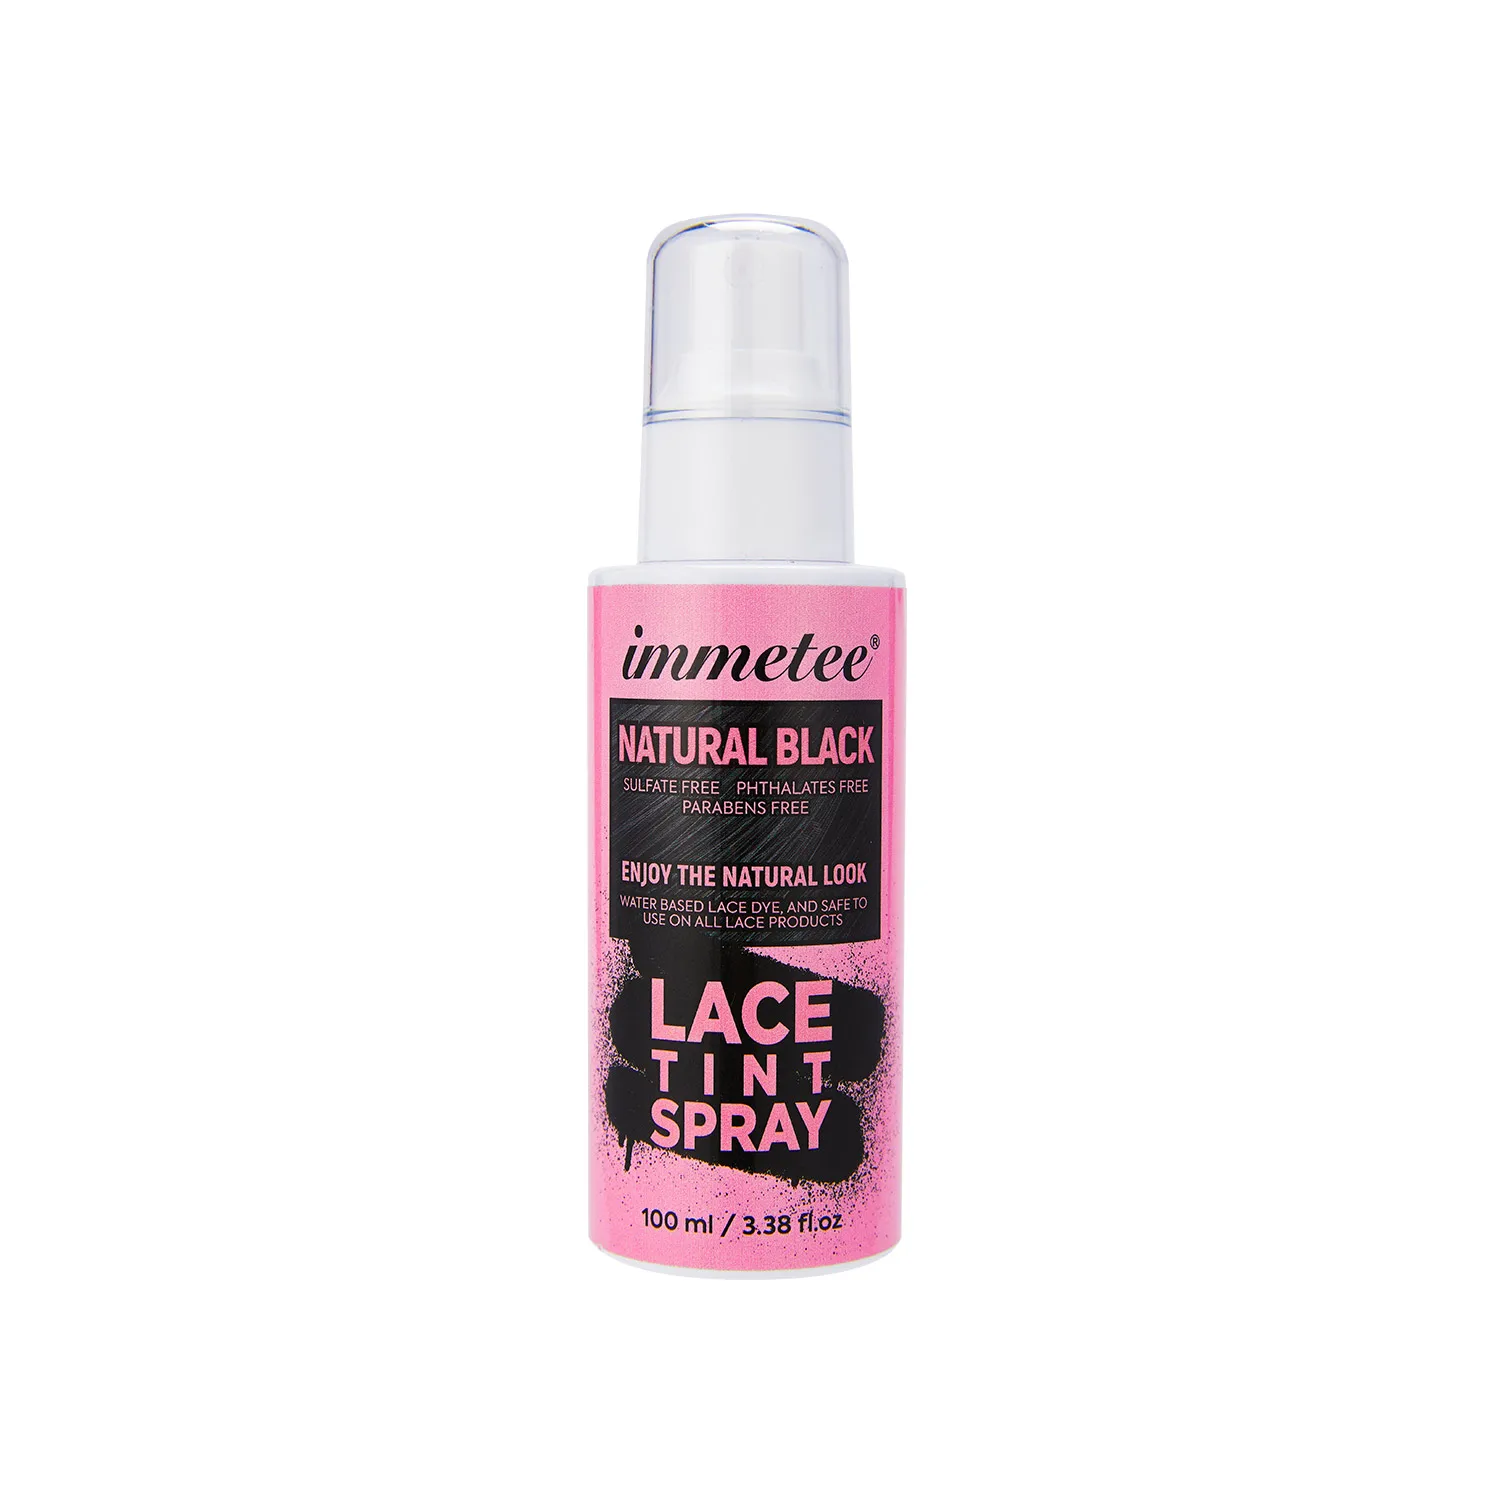 Immetee Top Ranking Lace Tint Spray